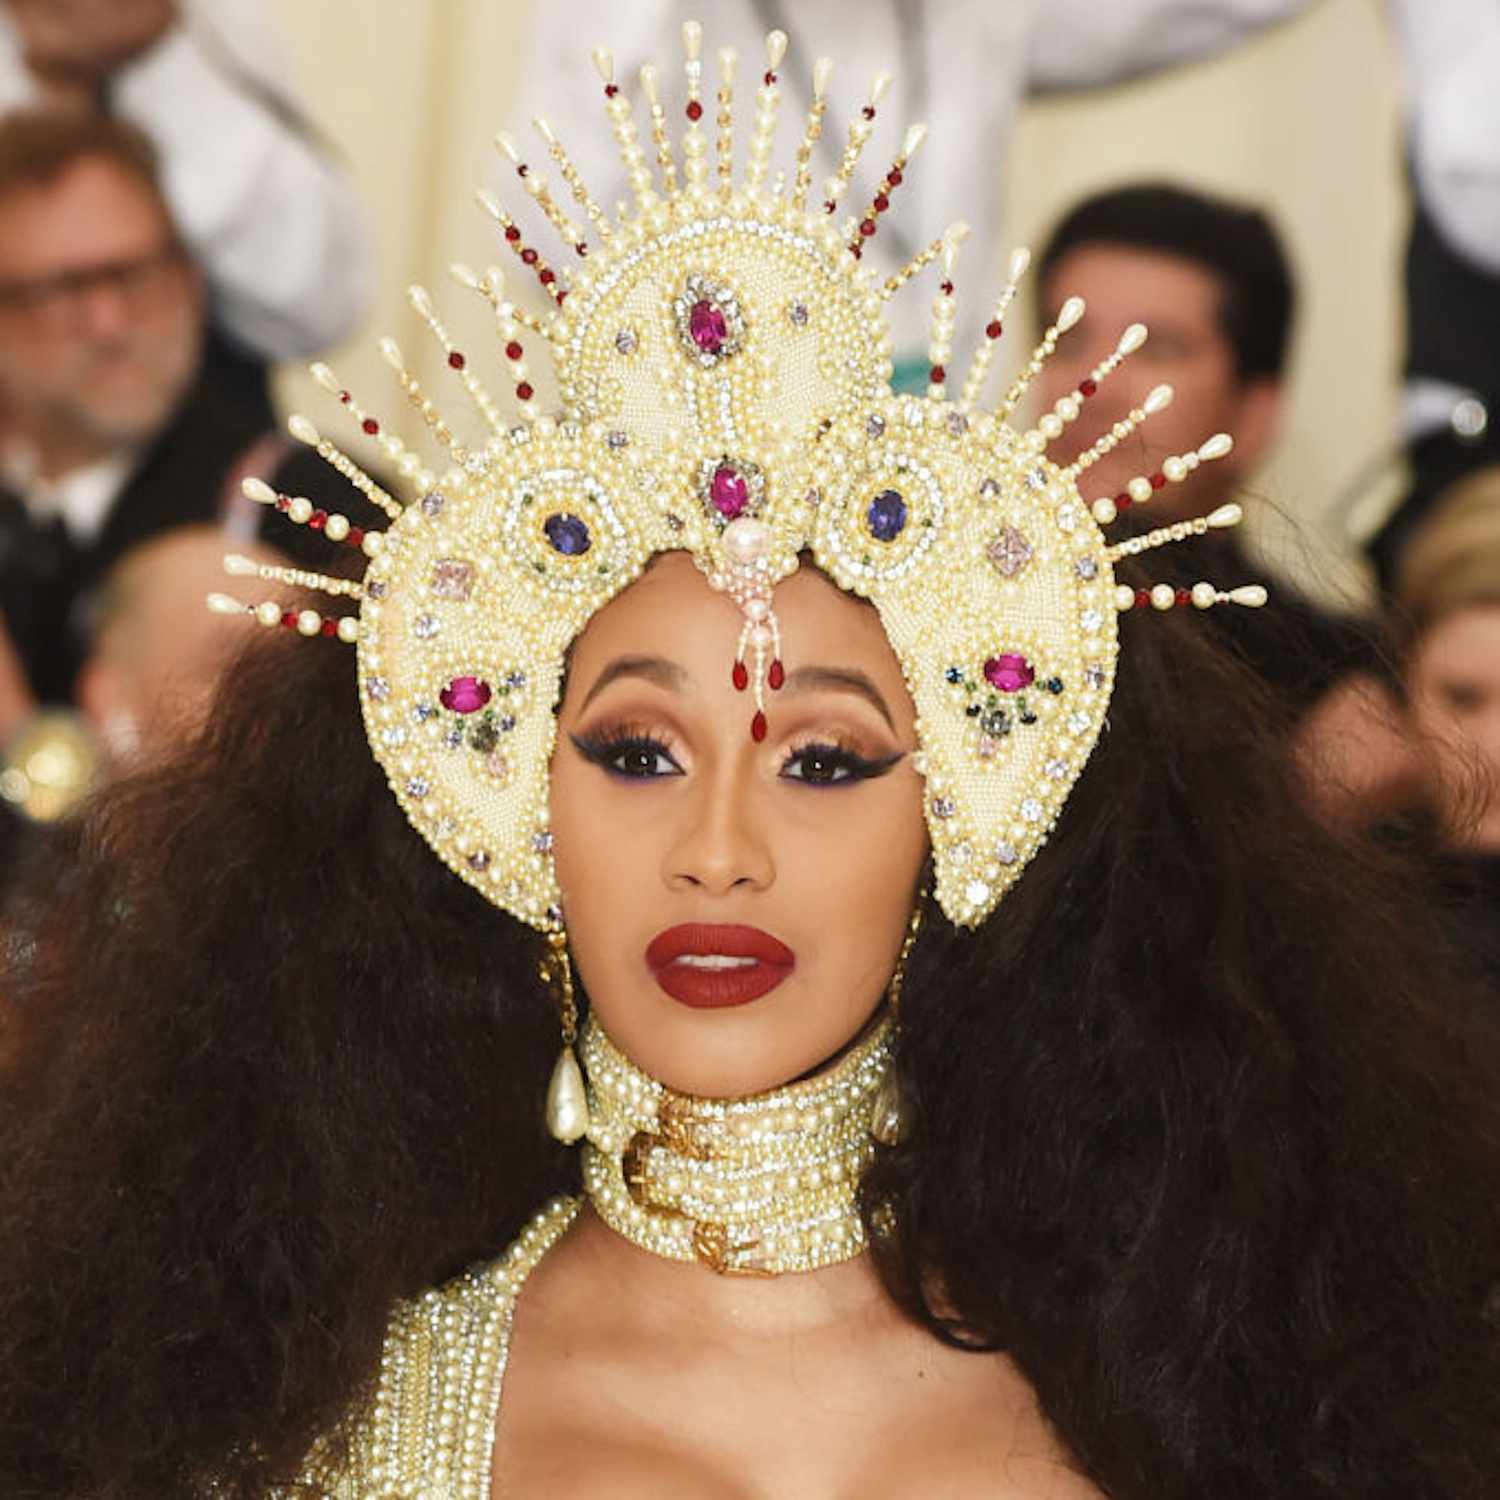 Cardi B wearing a halo crown, her hair in big dramatic waves